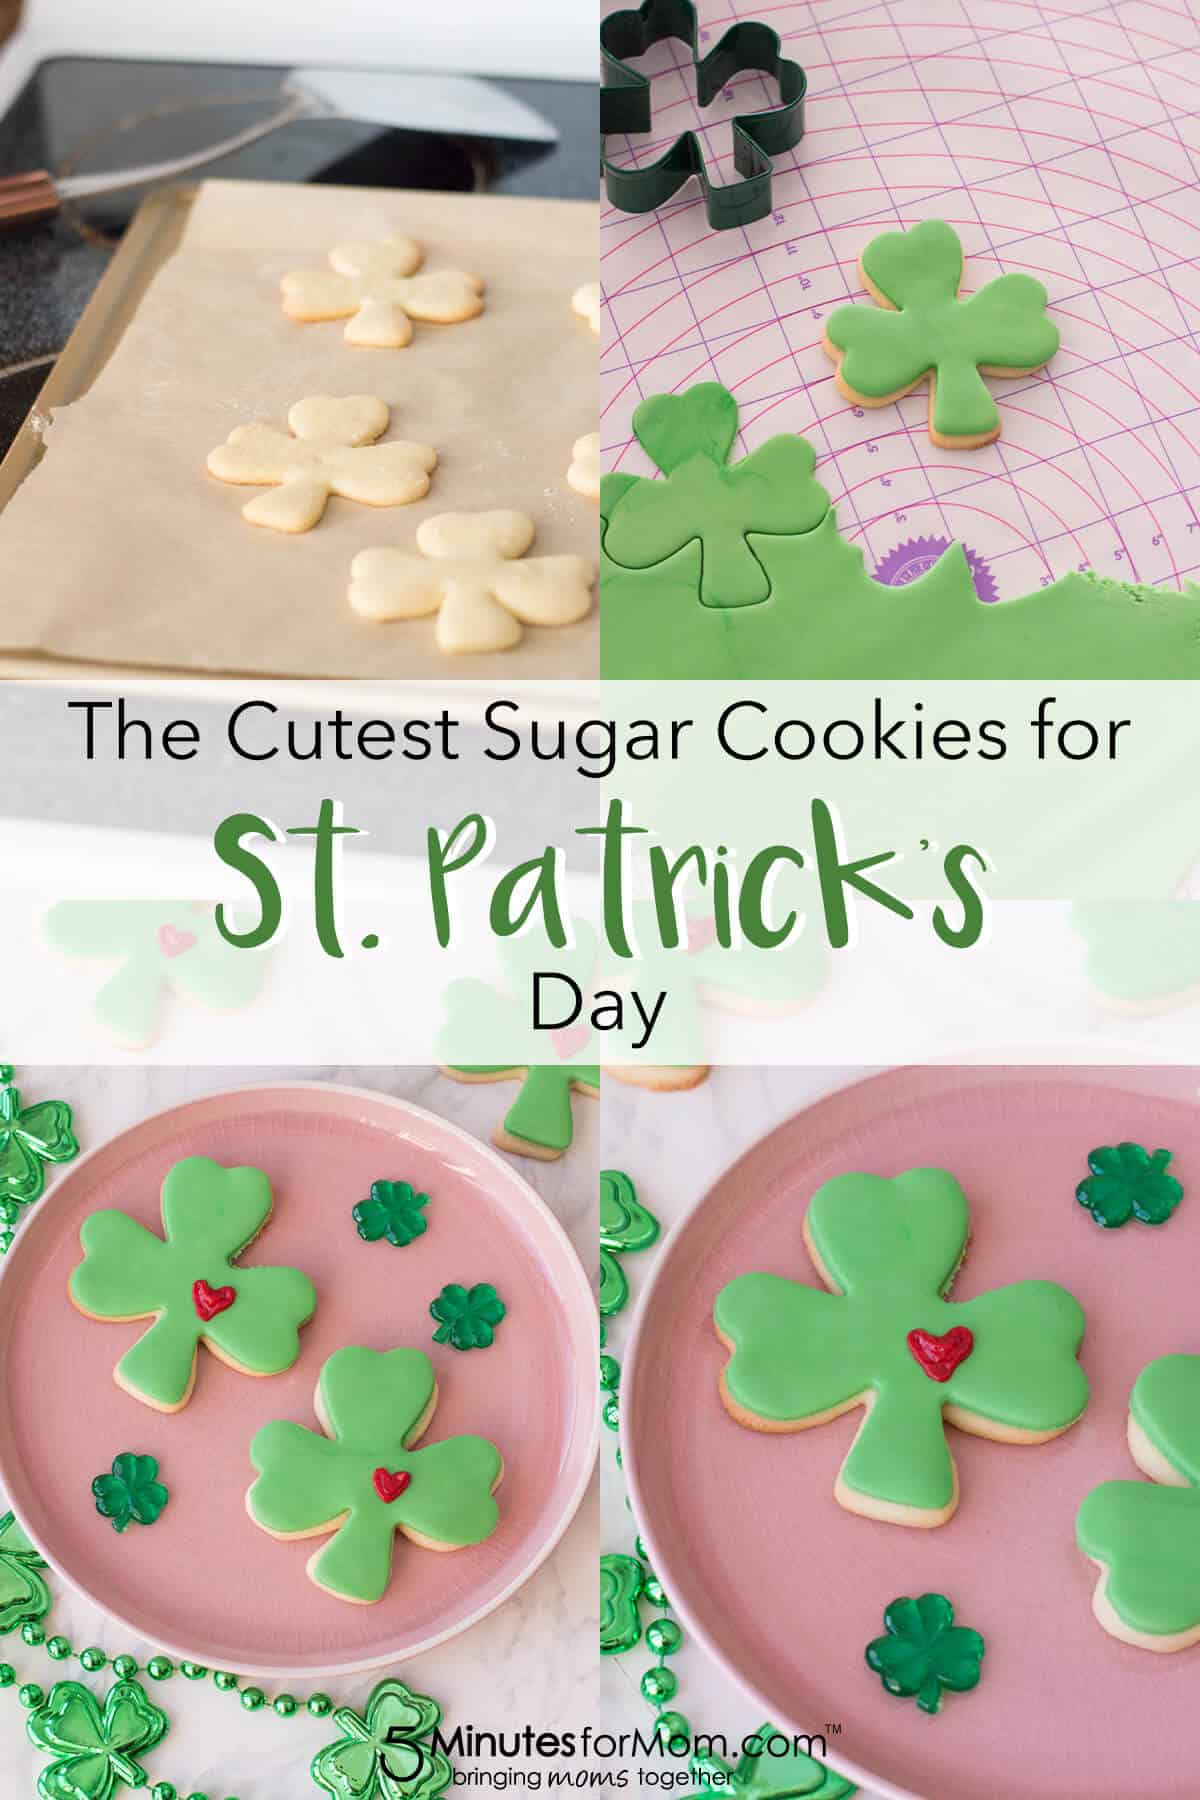 St. Patrick's Day Sugar Cookies shaped as lucky clovers with green fondant and a frosted heart.